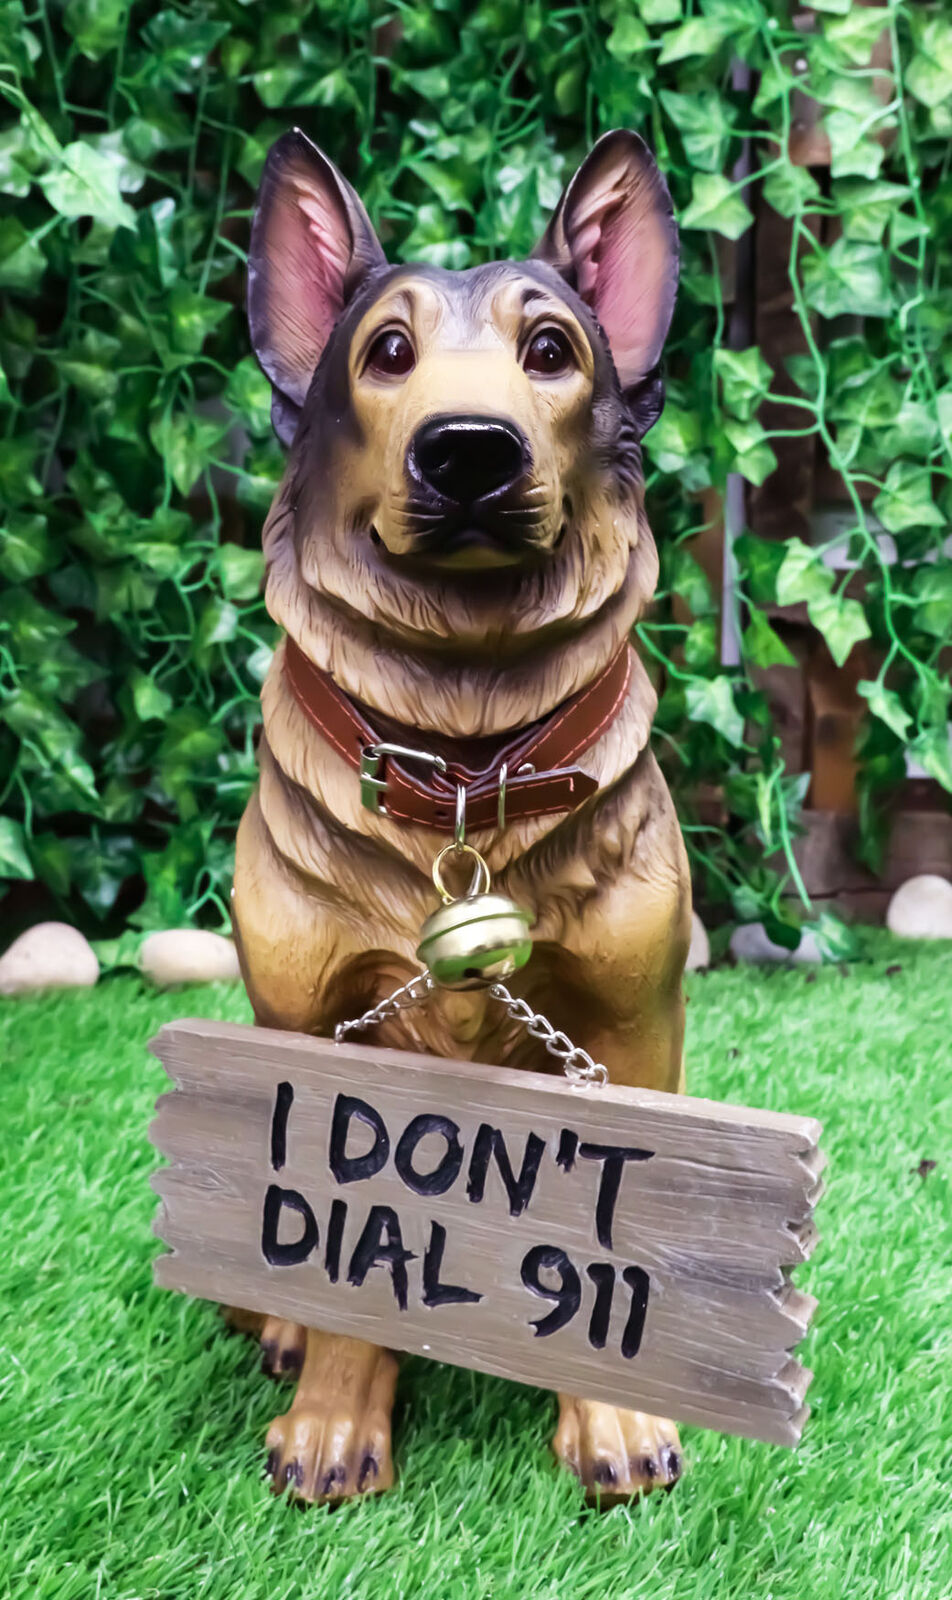 German Shepherd Dog Comical Welcome Sign I don't dial 911 Figurine Home Decor